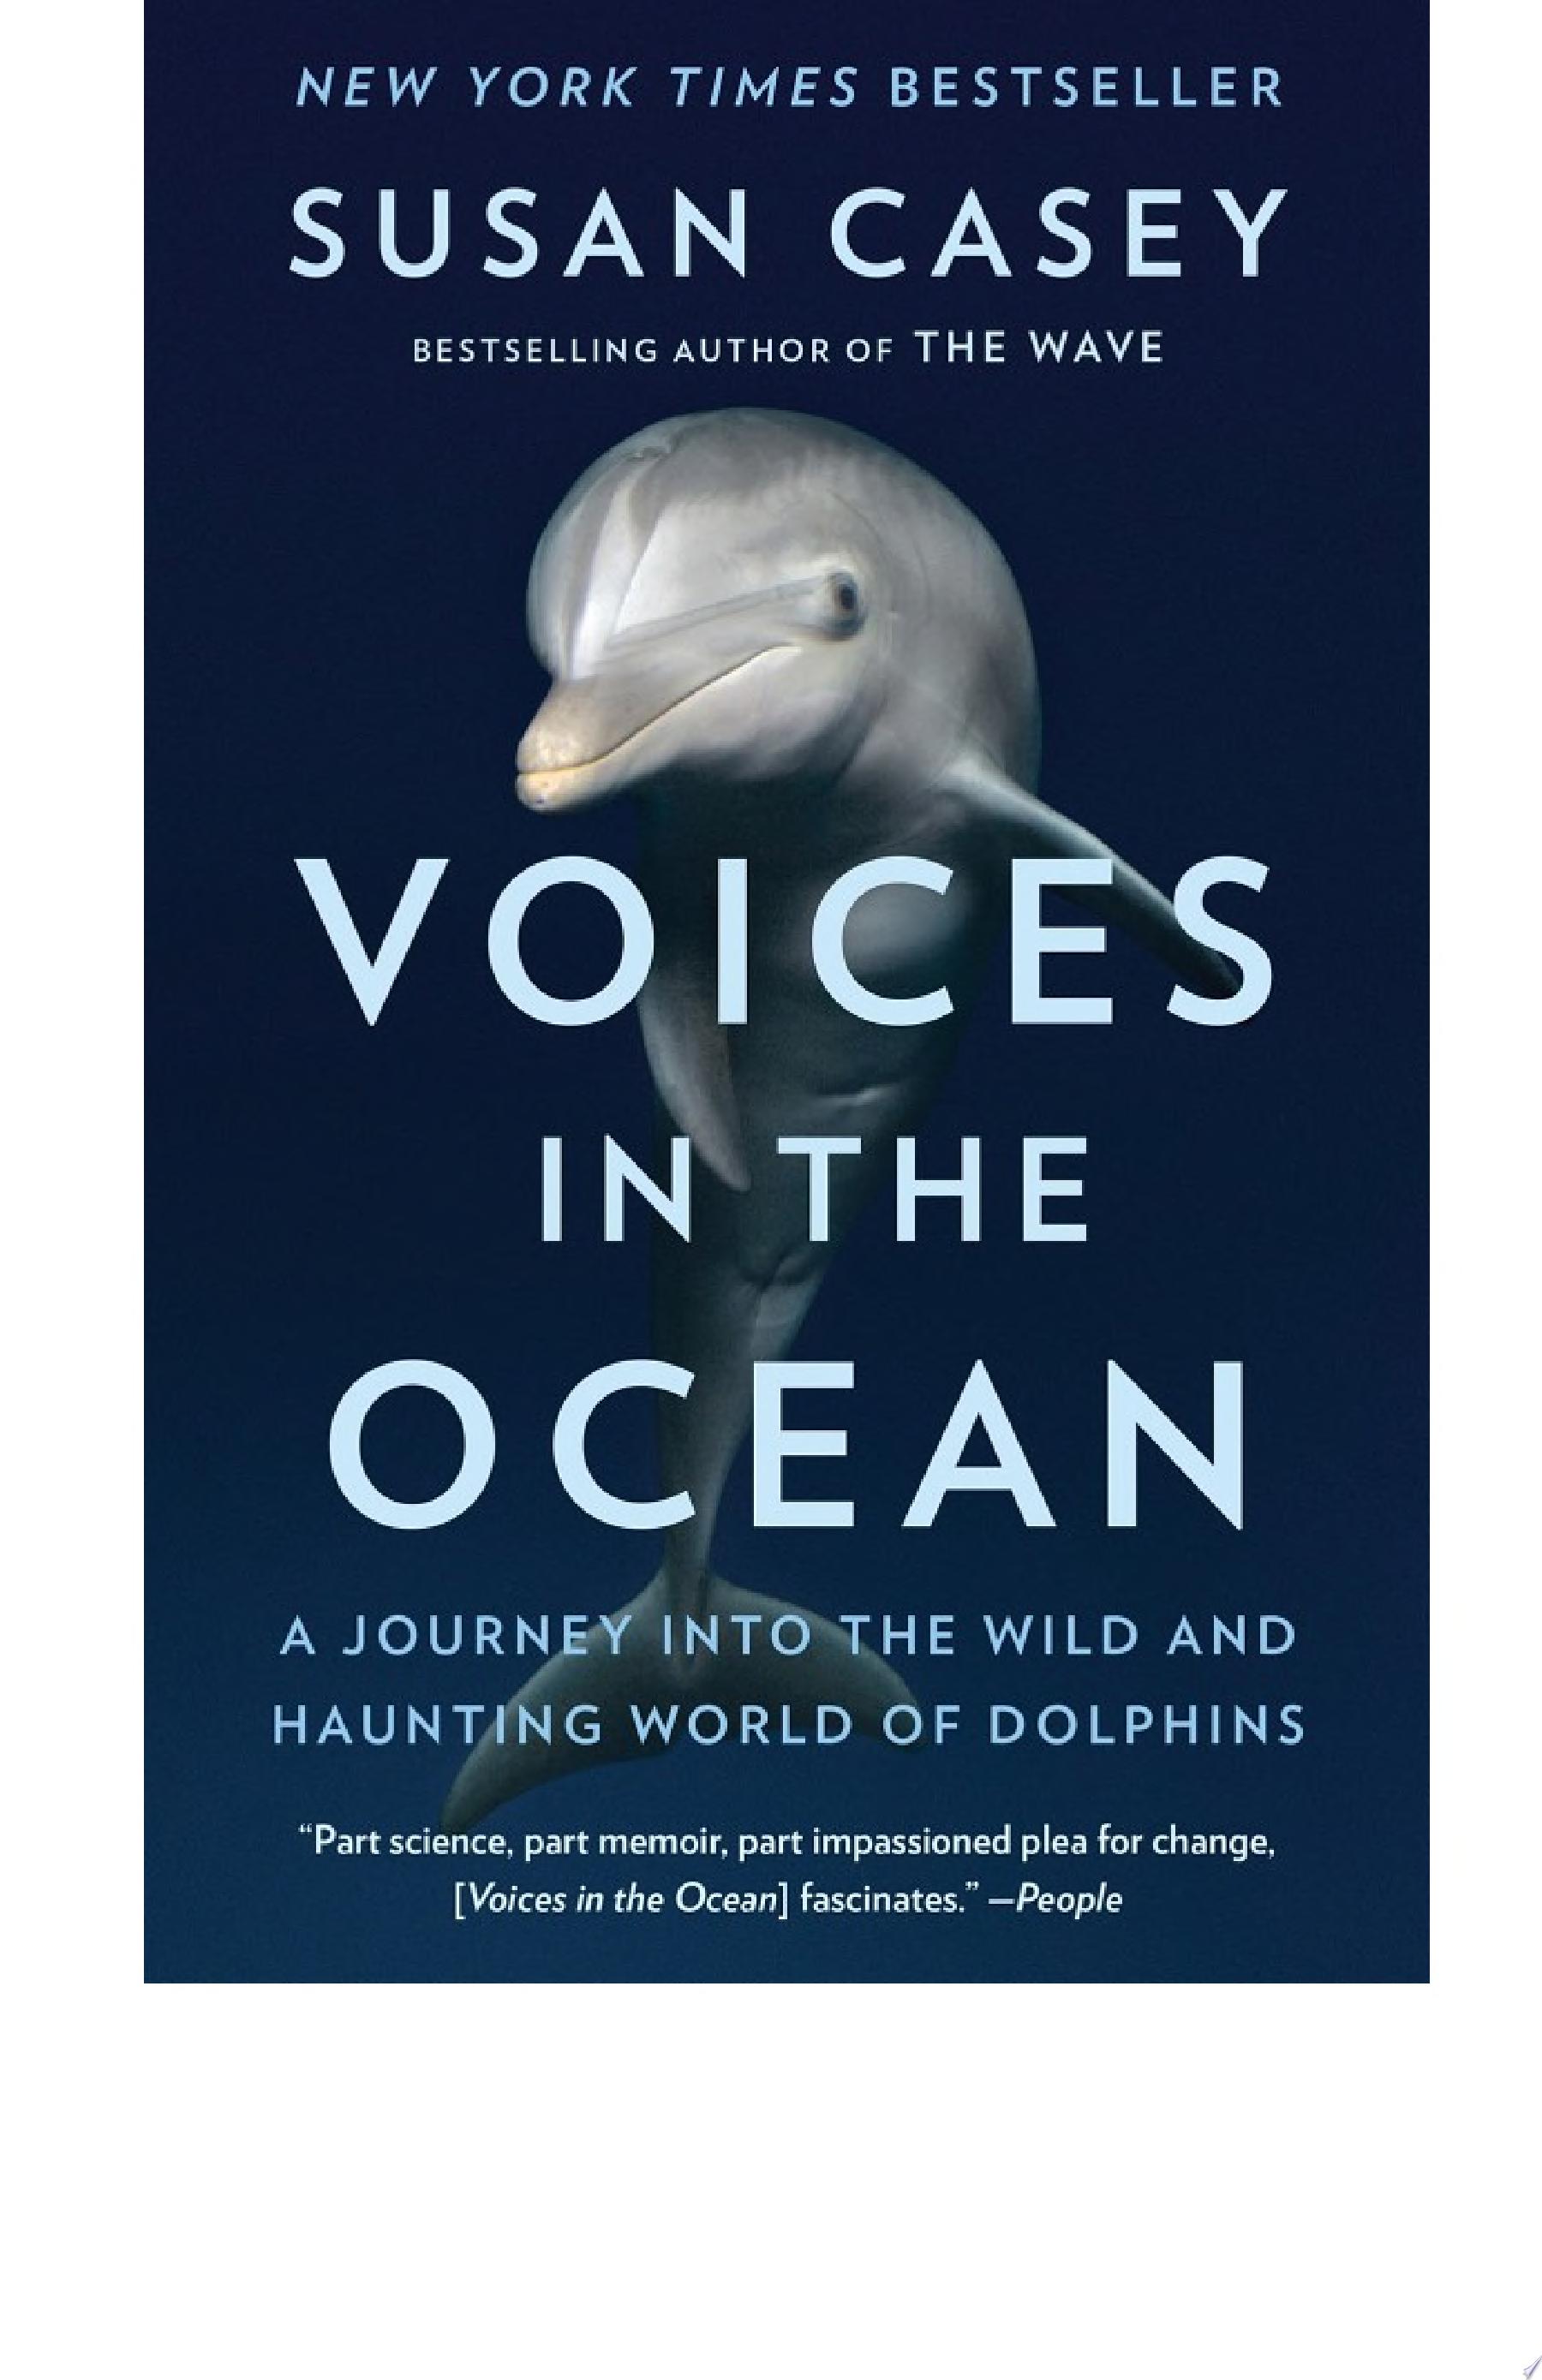 Image for "Voices in the Ocean"